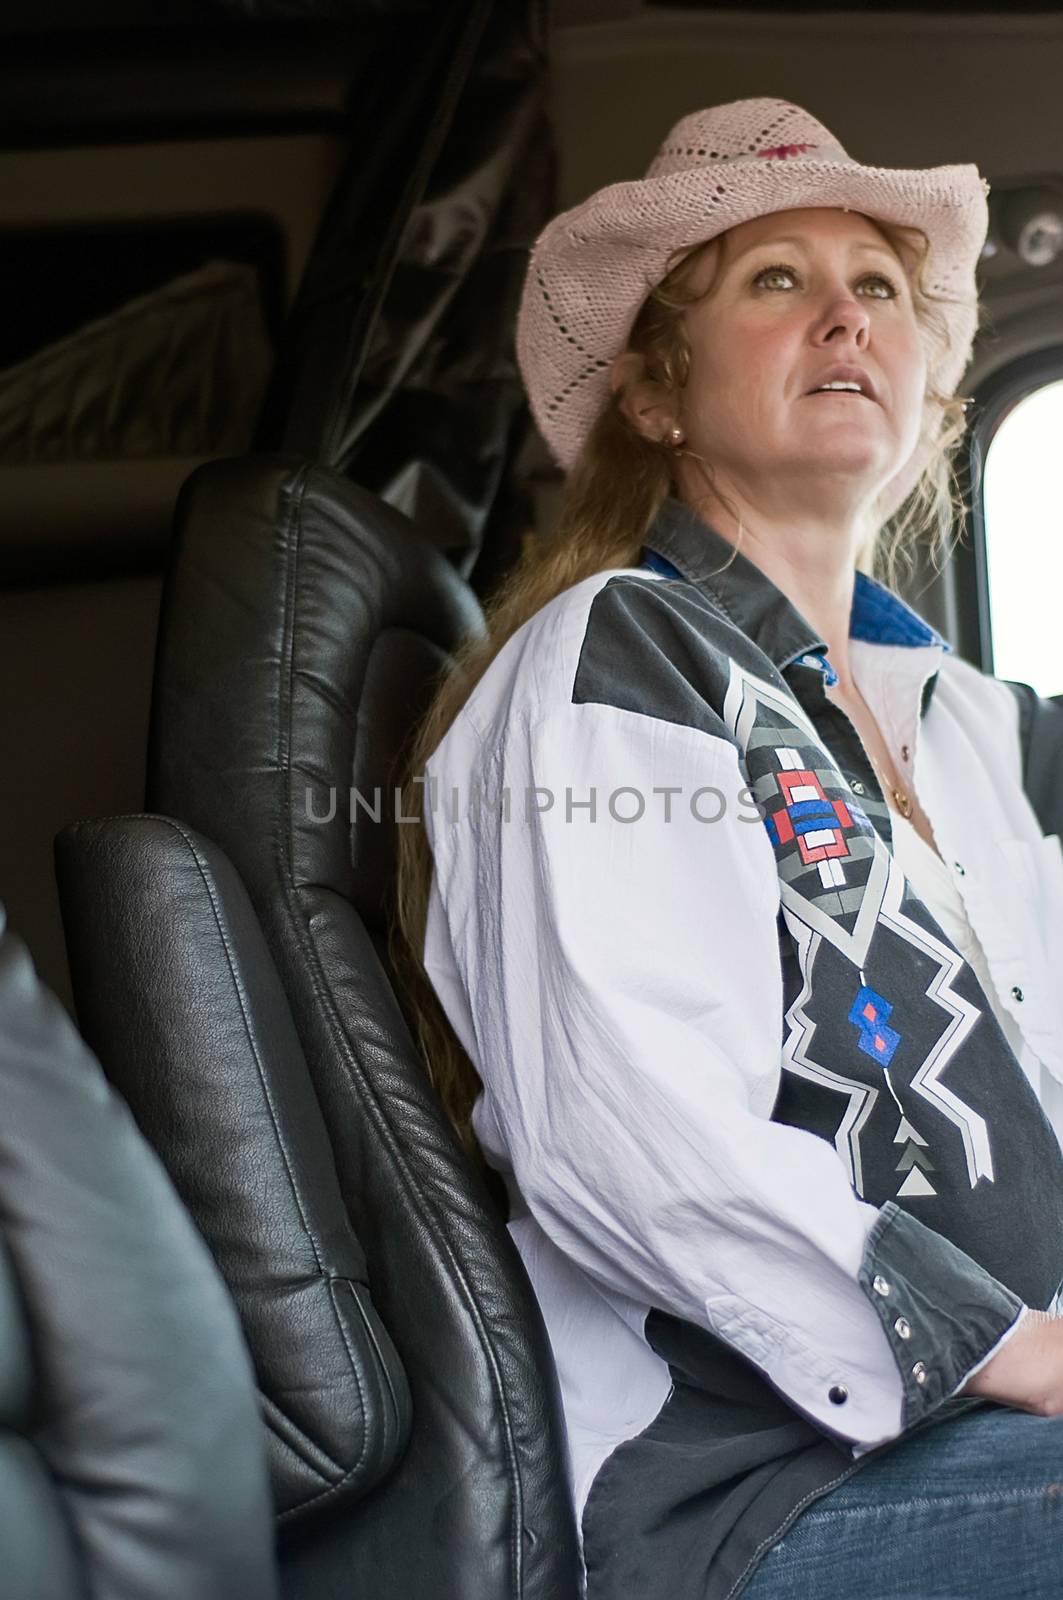 Woman Truck Driver Looking Ahead by rcarner